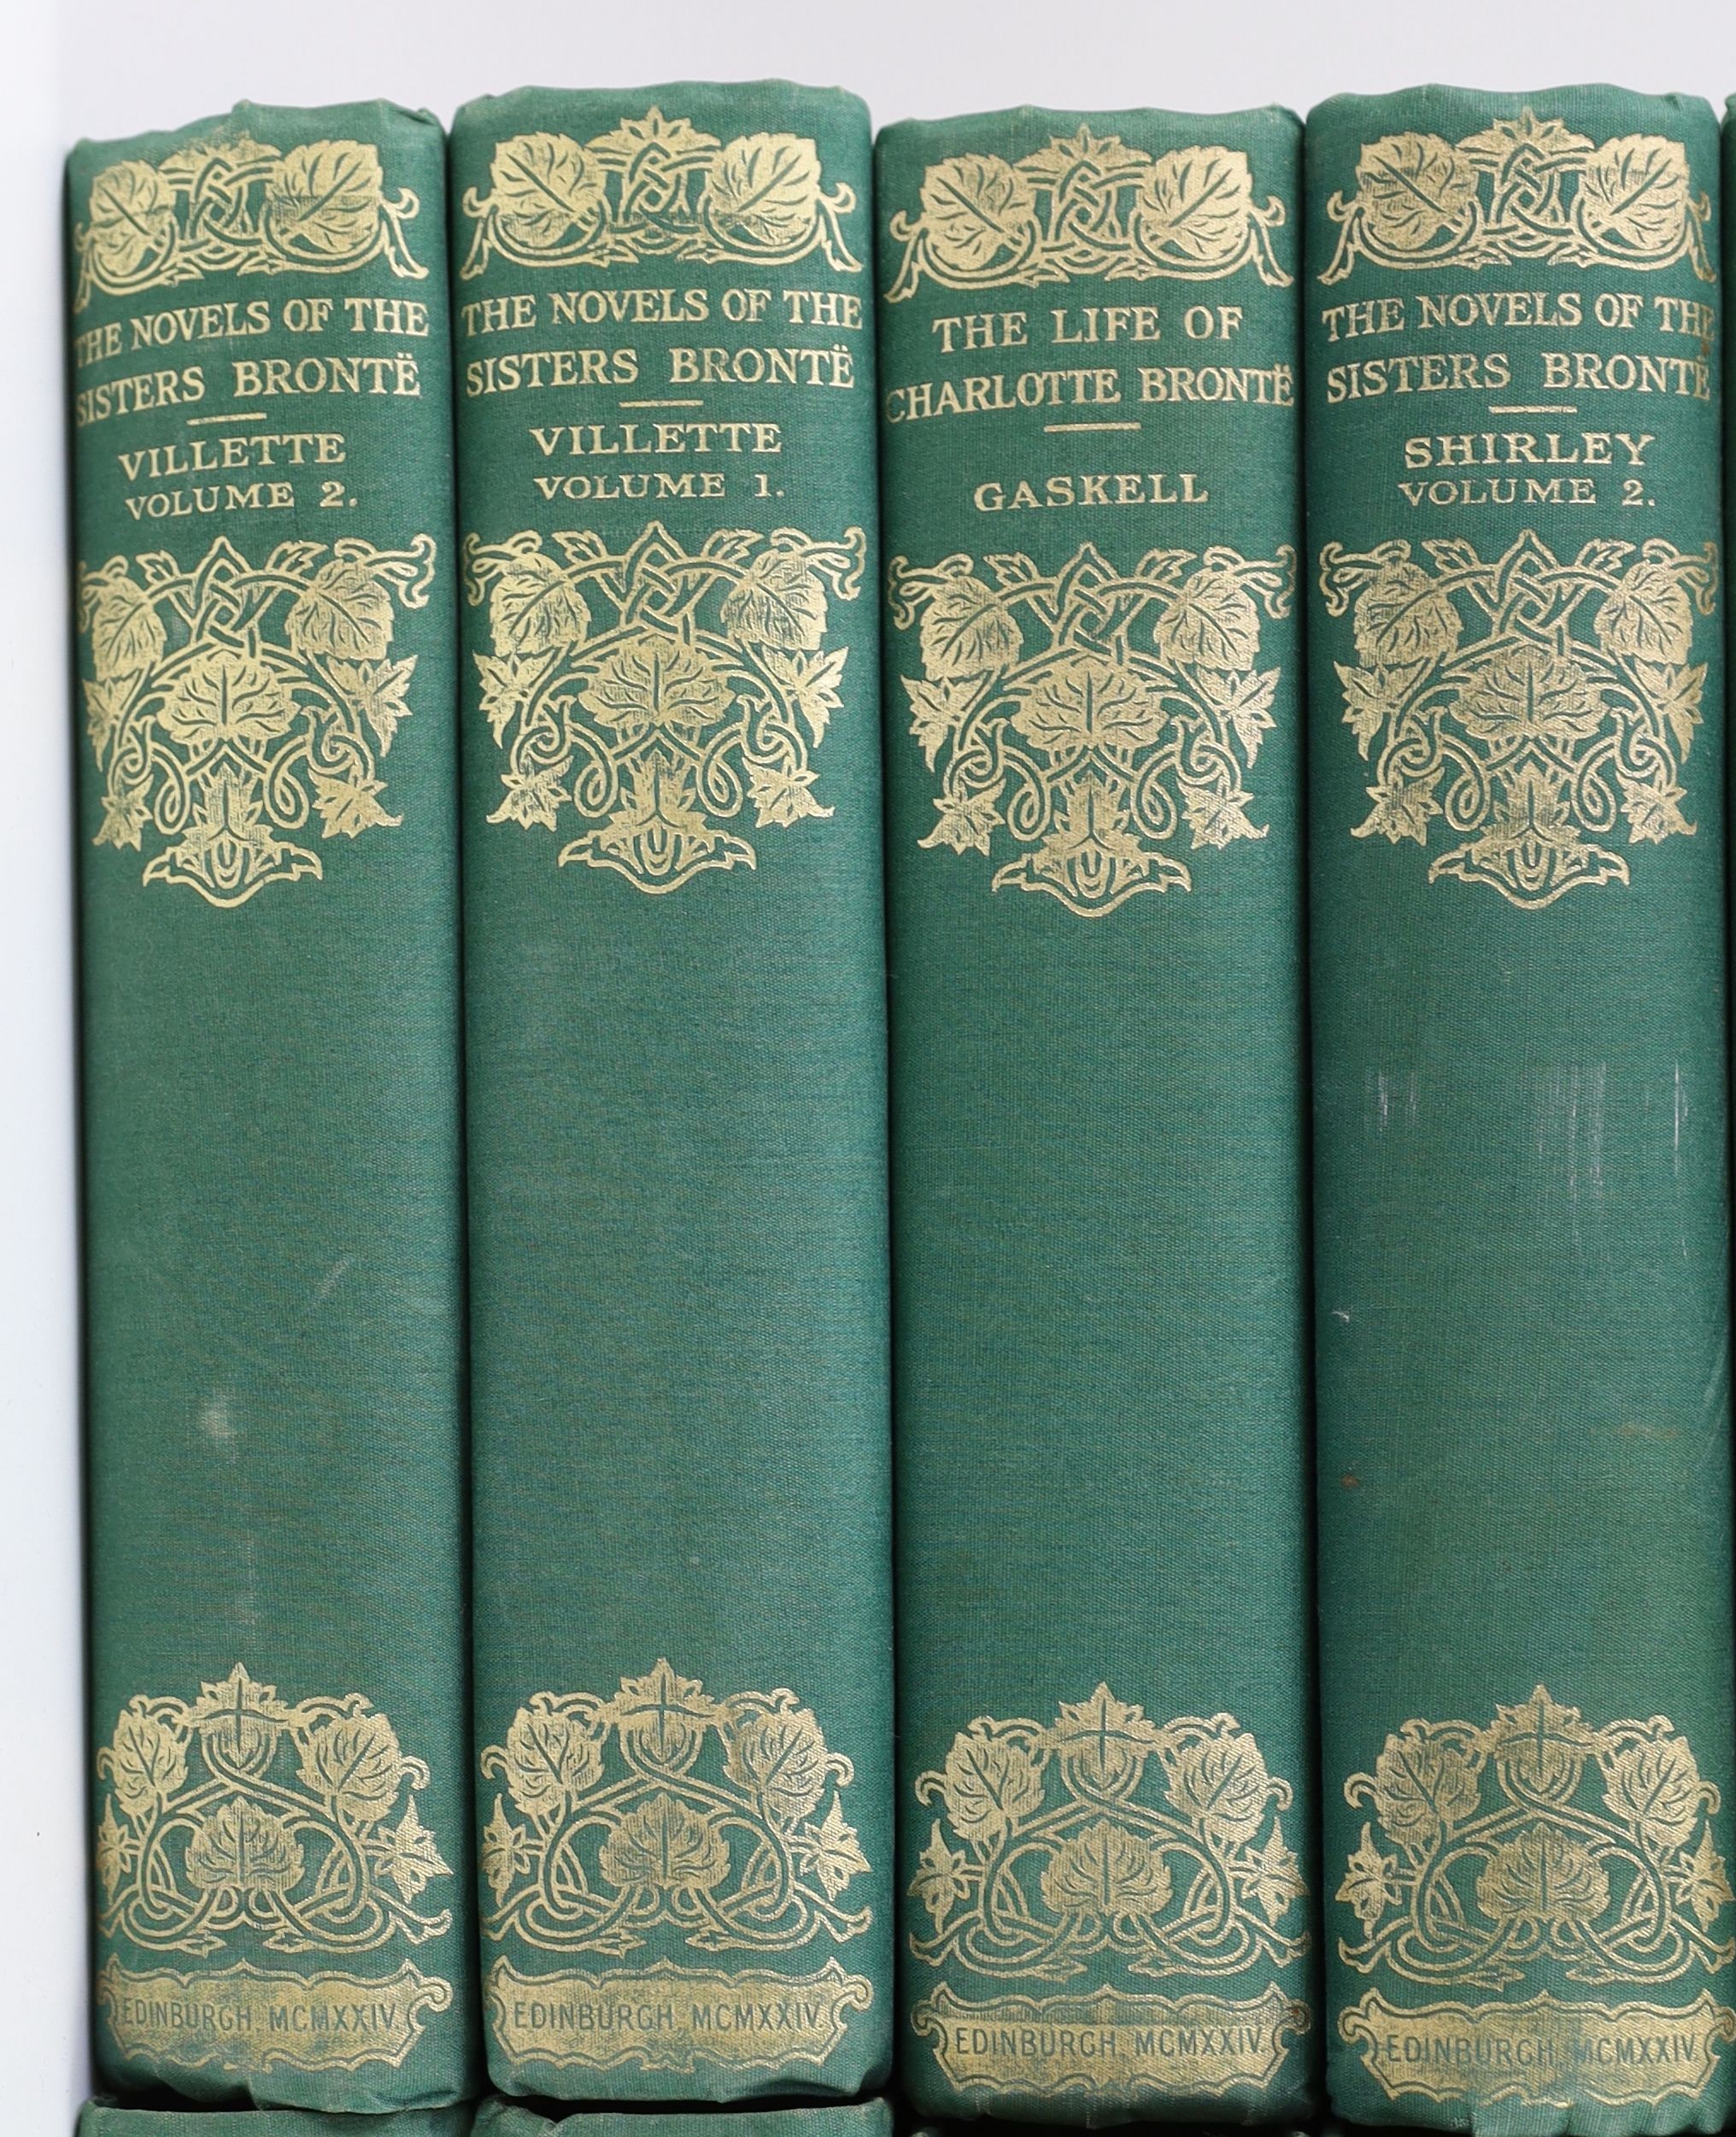 Bronte, Charlotte, Emily and Anne - Works. - ‘’Novels of the Sisters Bronte.’’ - 12 vols, the Thornton edition, edited by Temple Scott, illustrated with 67 plates, original cloth gilt, Edinburgh, 1924